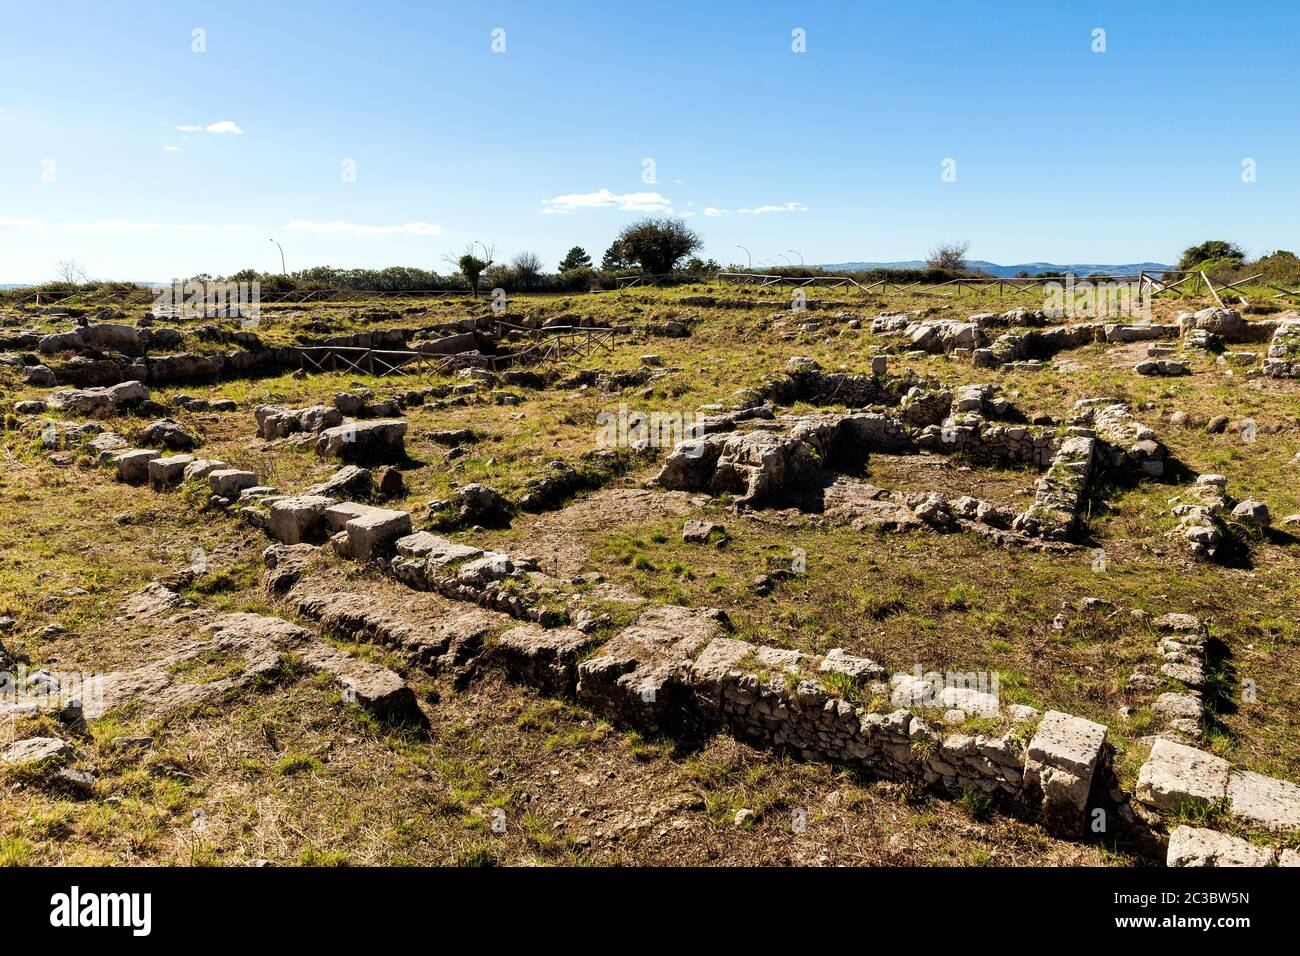 Landscapes of The Archaeological Zone - The Acropolis in Palazzolo Acreide, Province of Syracuse,Italy. Stock Photo